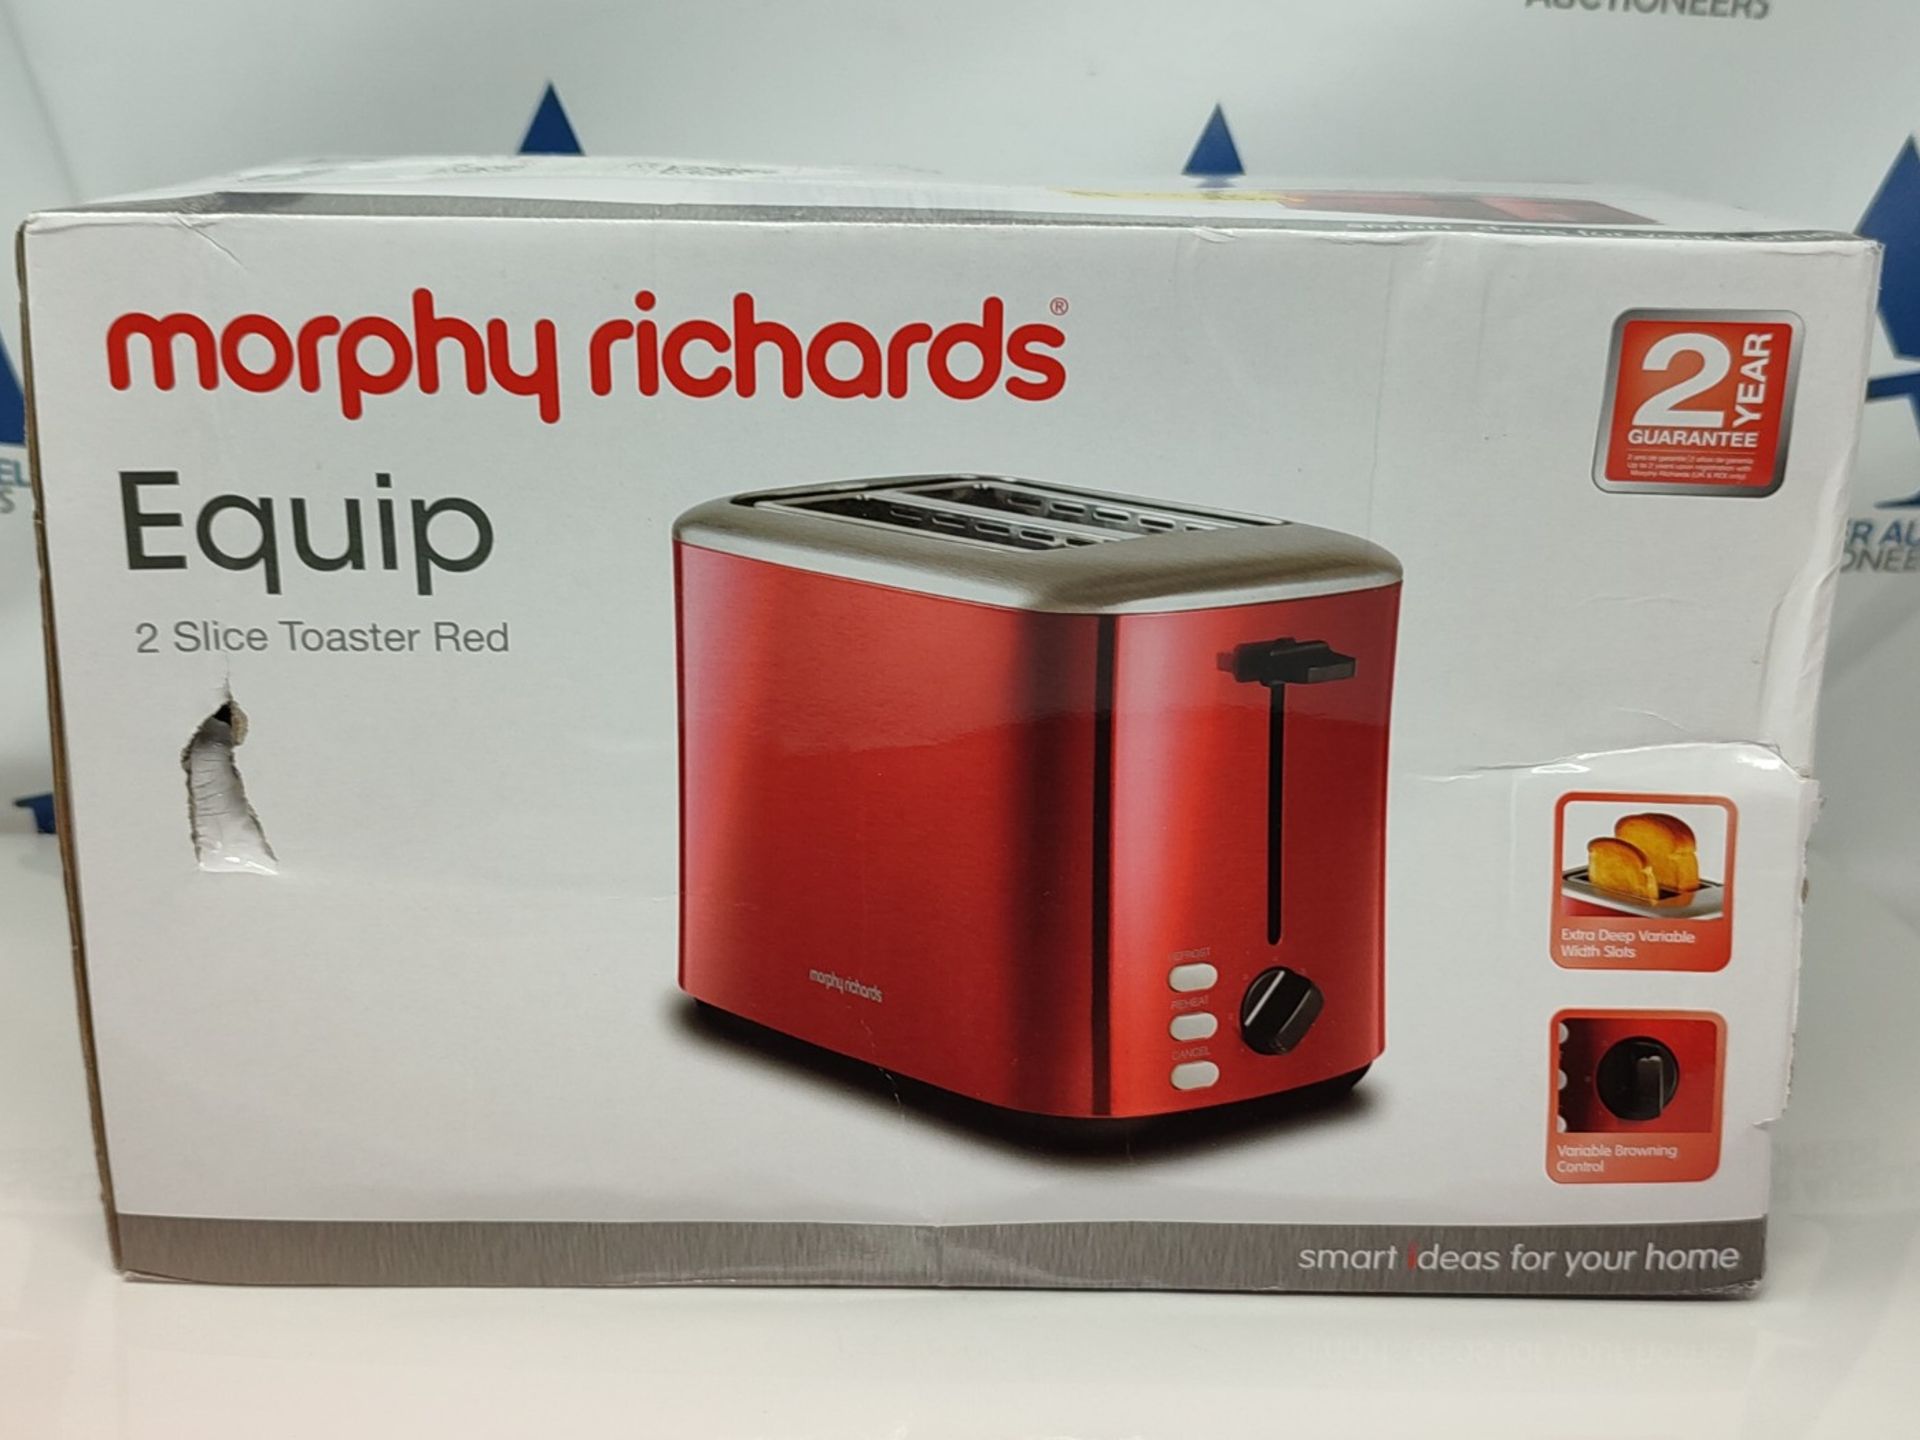 Morphy Richards Equip Red 2 Slice Toaster - Defrost And Reheat Settings - 2 Slot - Sta - Image 3 of 3